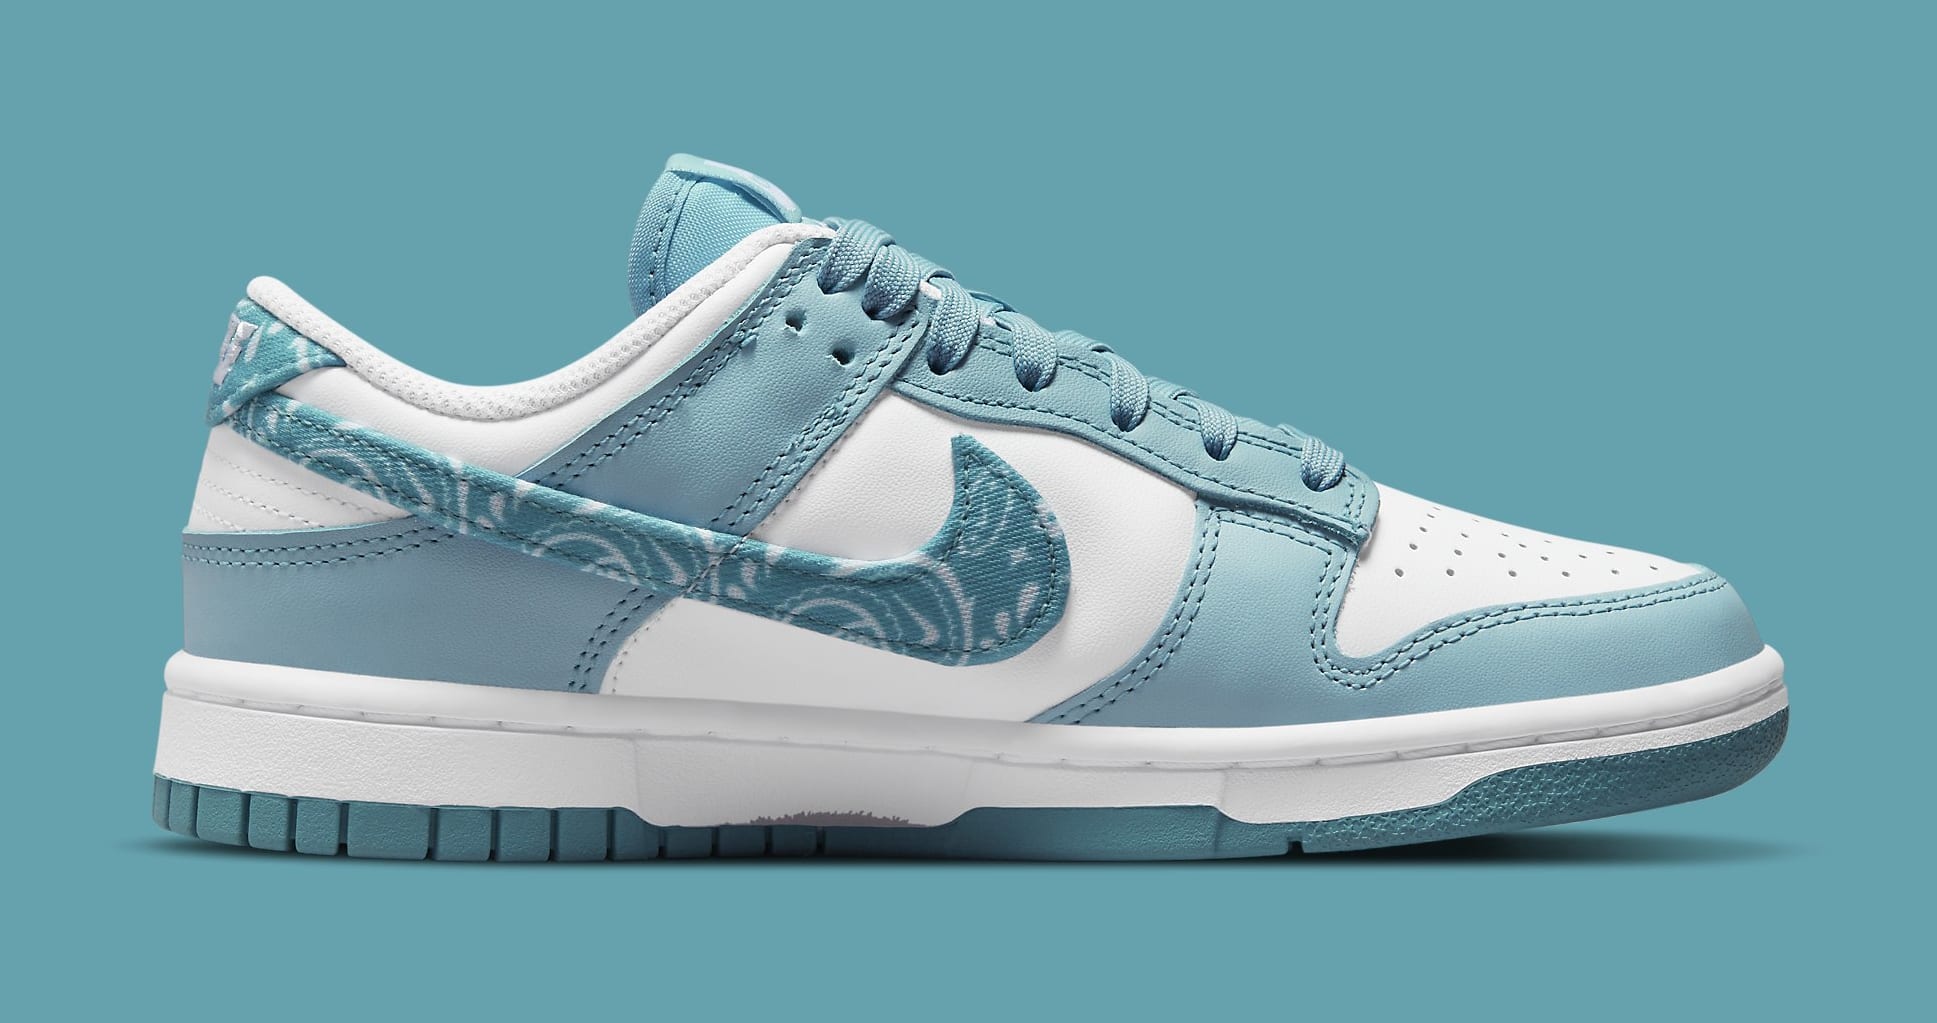 Nike Dunk Low 'Paisley Teal' DH4401 101 Medial